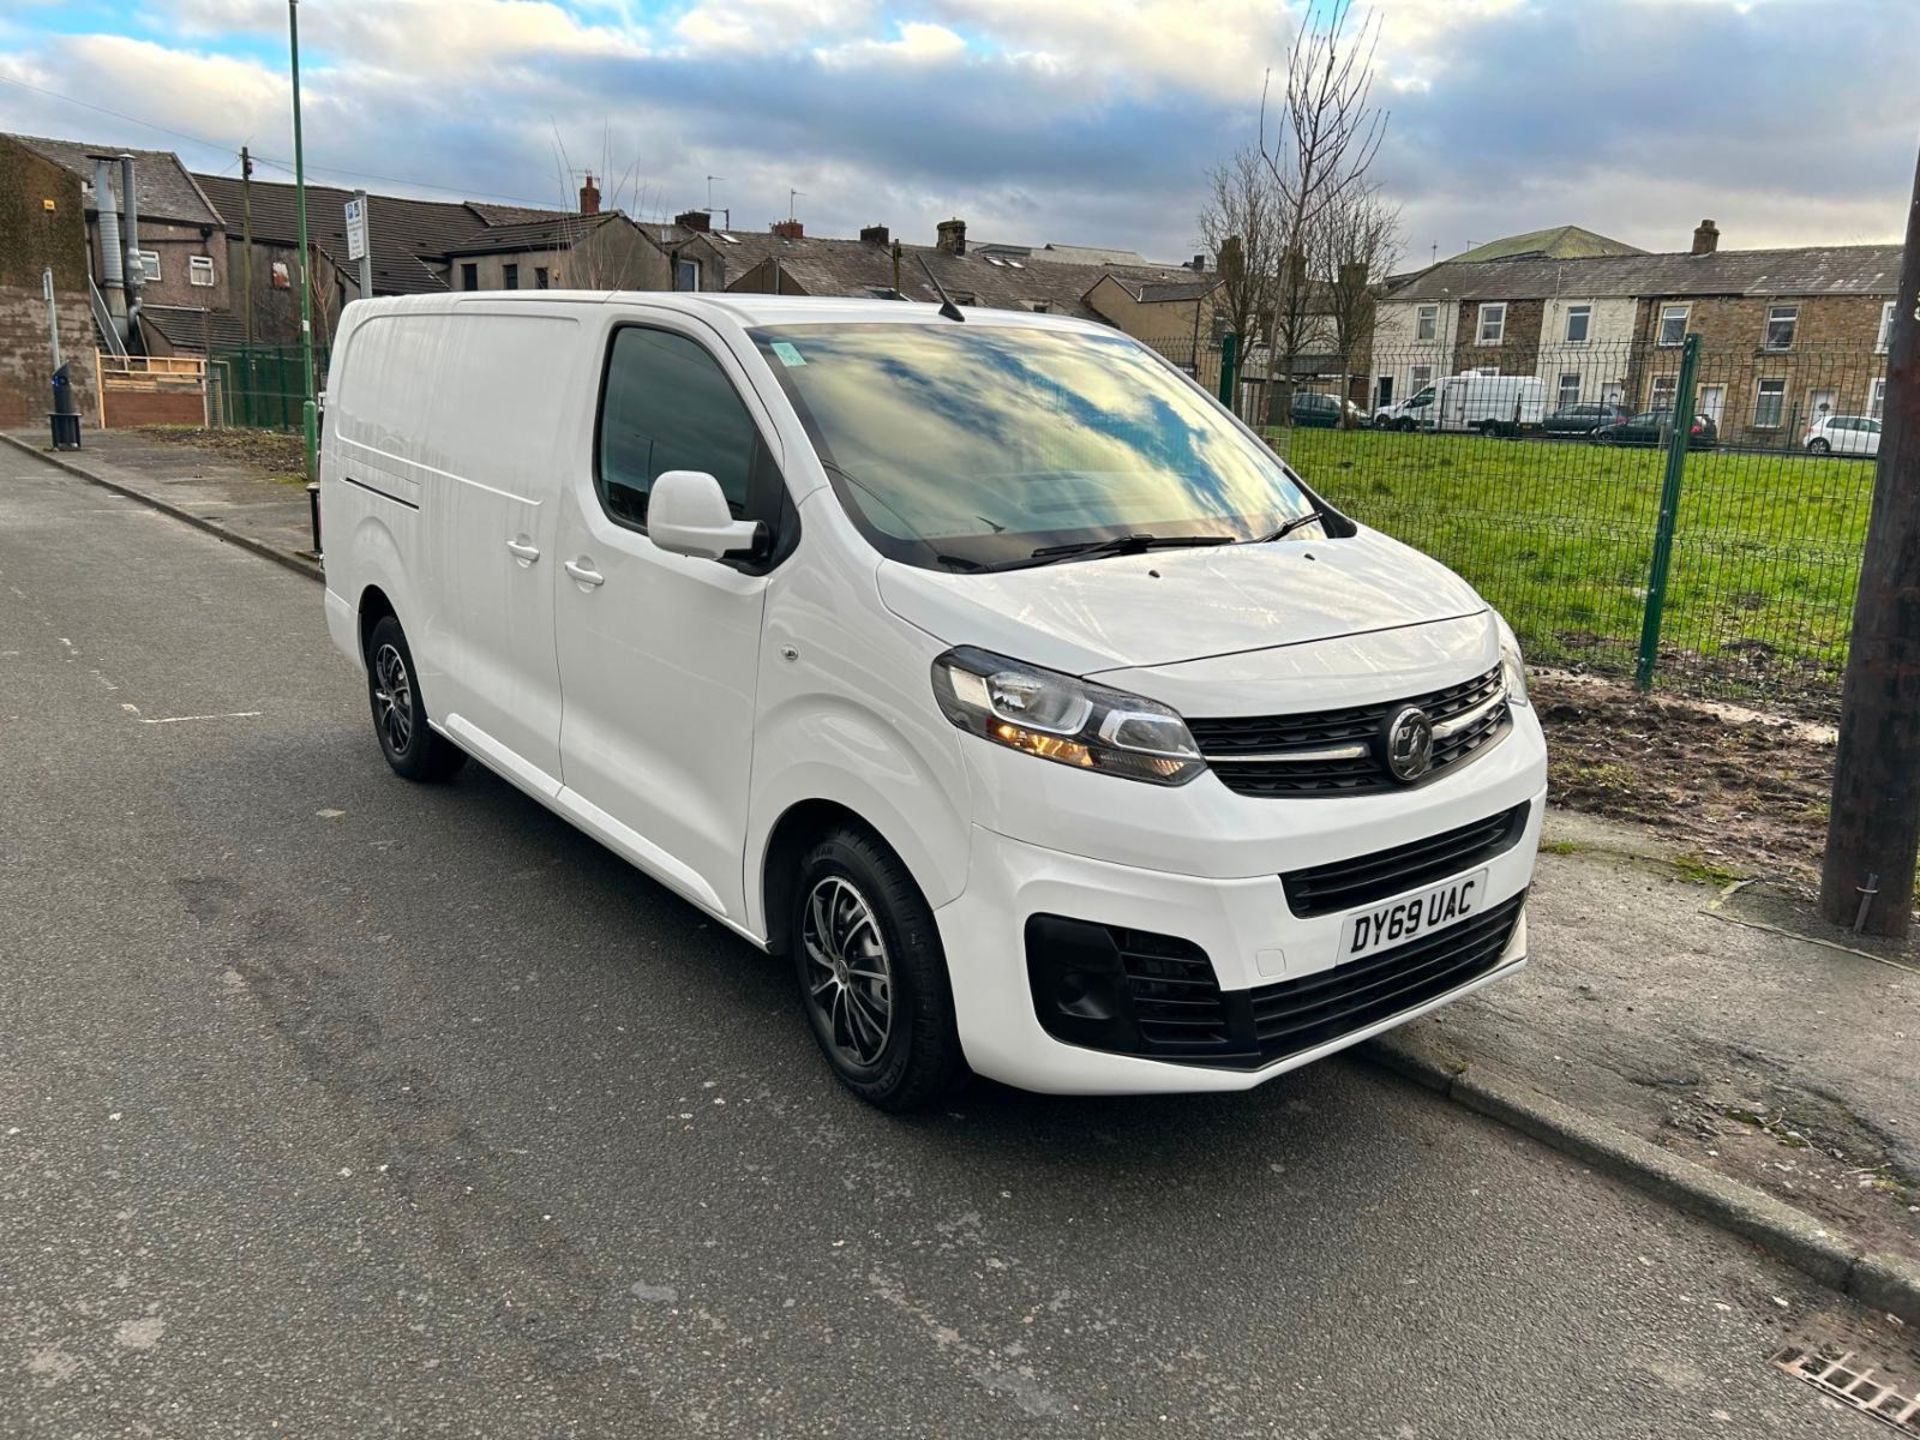 2019 VAUXHALL VIVARO SPORTIVE- ONLY 21 MILES- READY FOR YOUR BUSINESS!